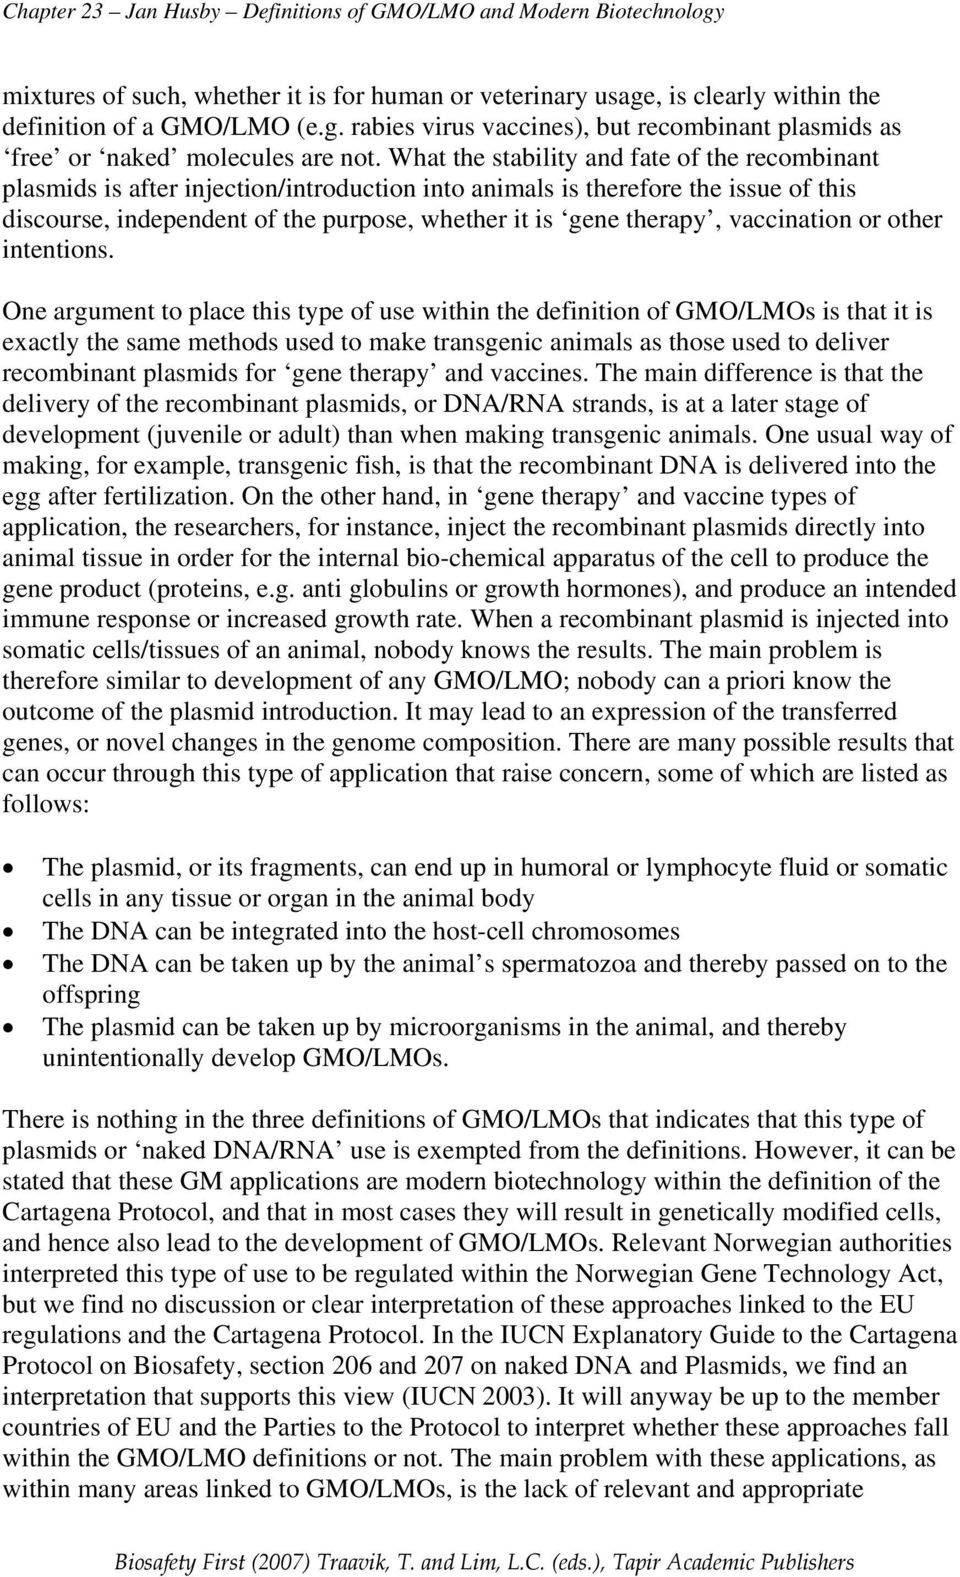 Chapter 23 Definitions of GMO/LMO and modern biotechnology. Three different  definitions but the same legal interpretation? - PDF Free Download